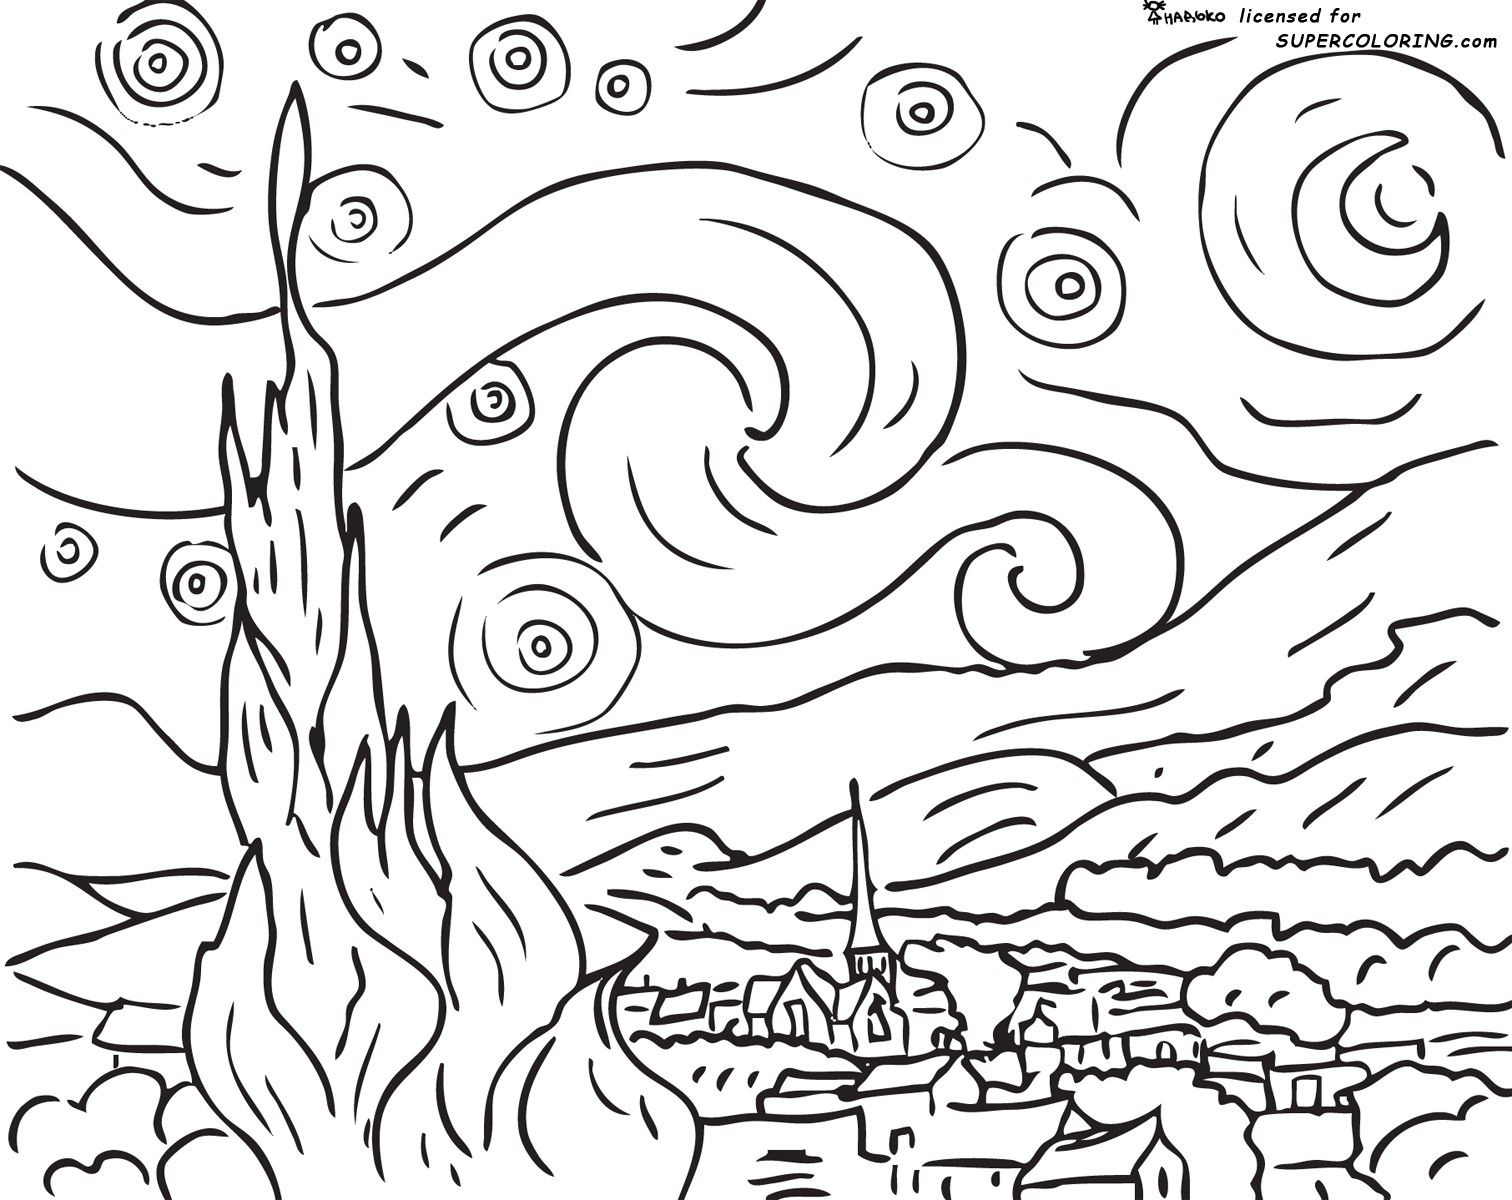 Printable For Teenagers - Coloring Pages for Kids and for Adults